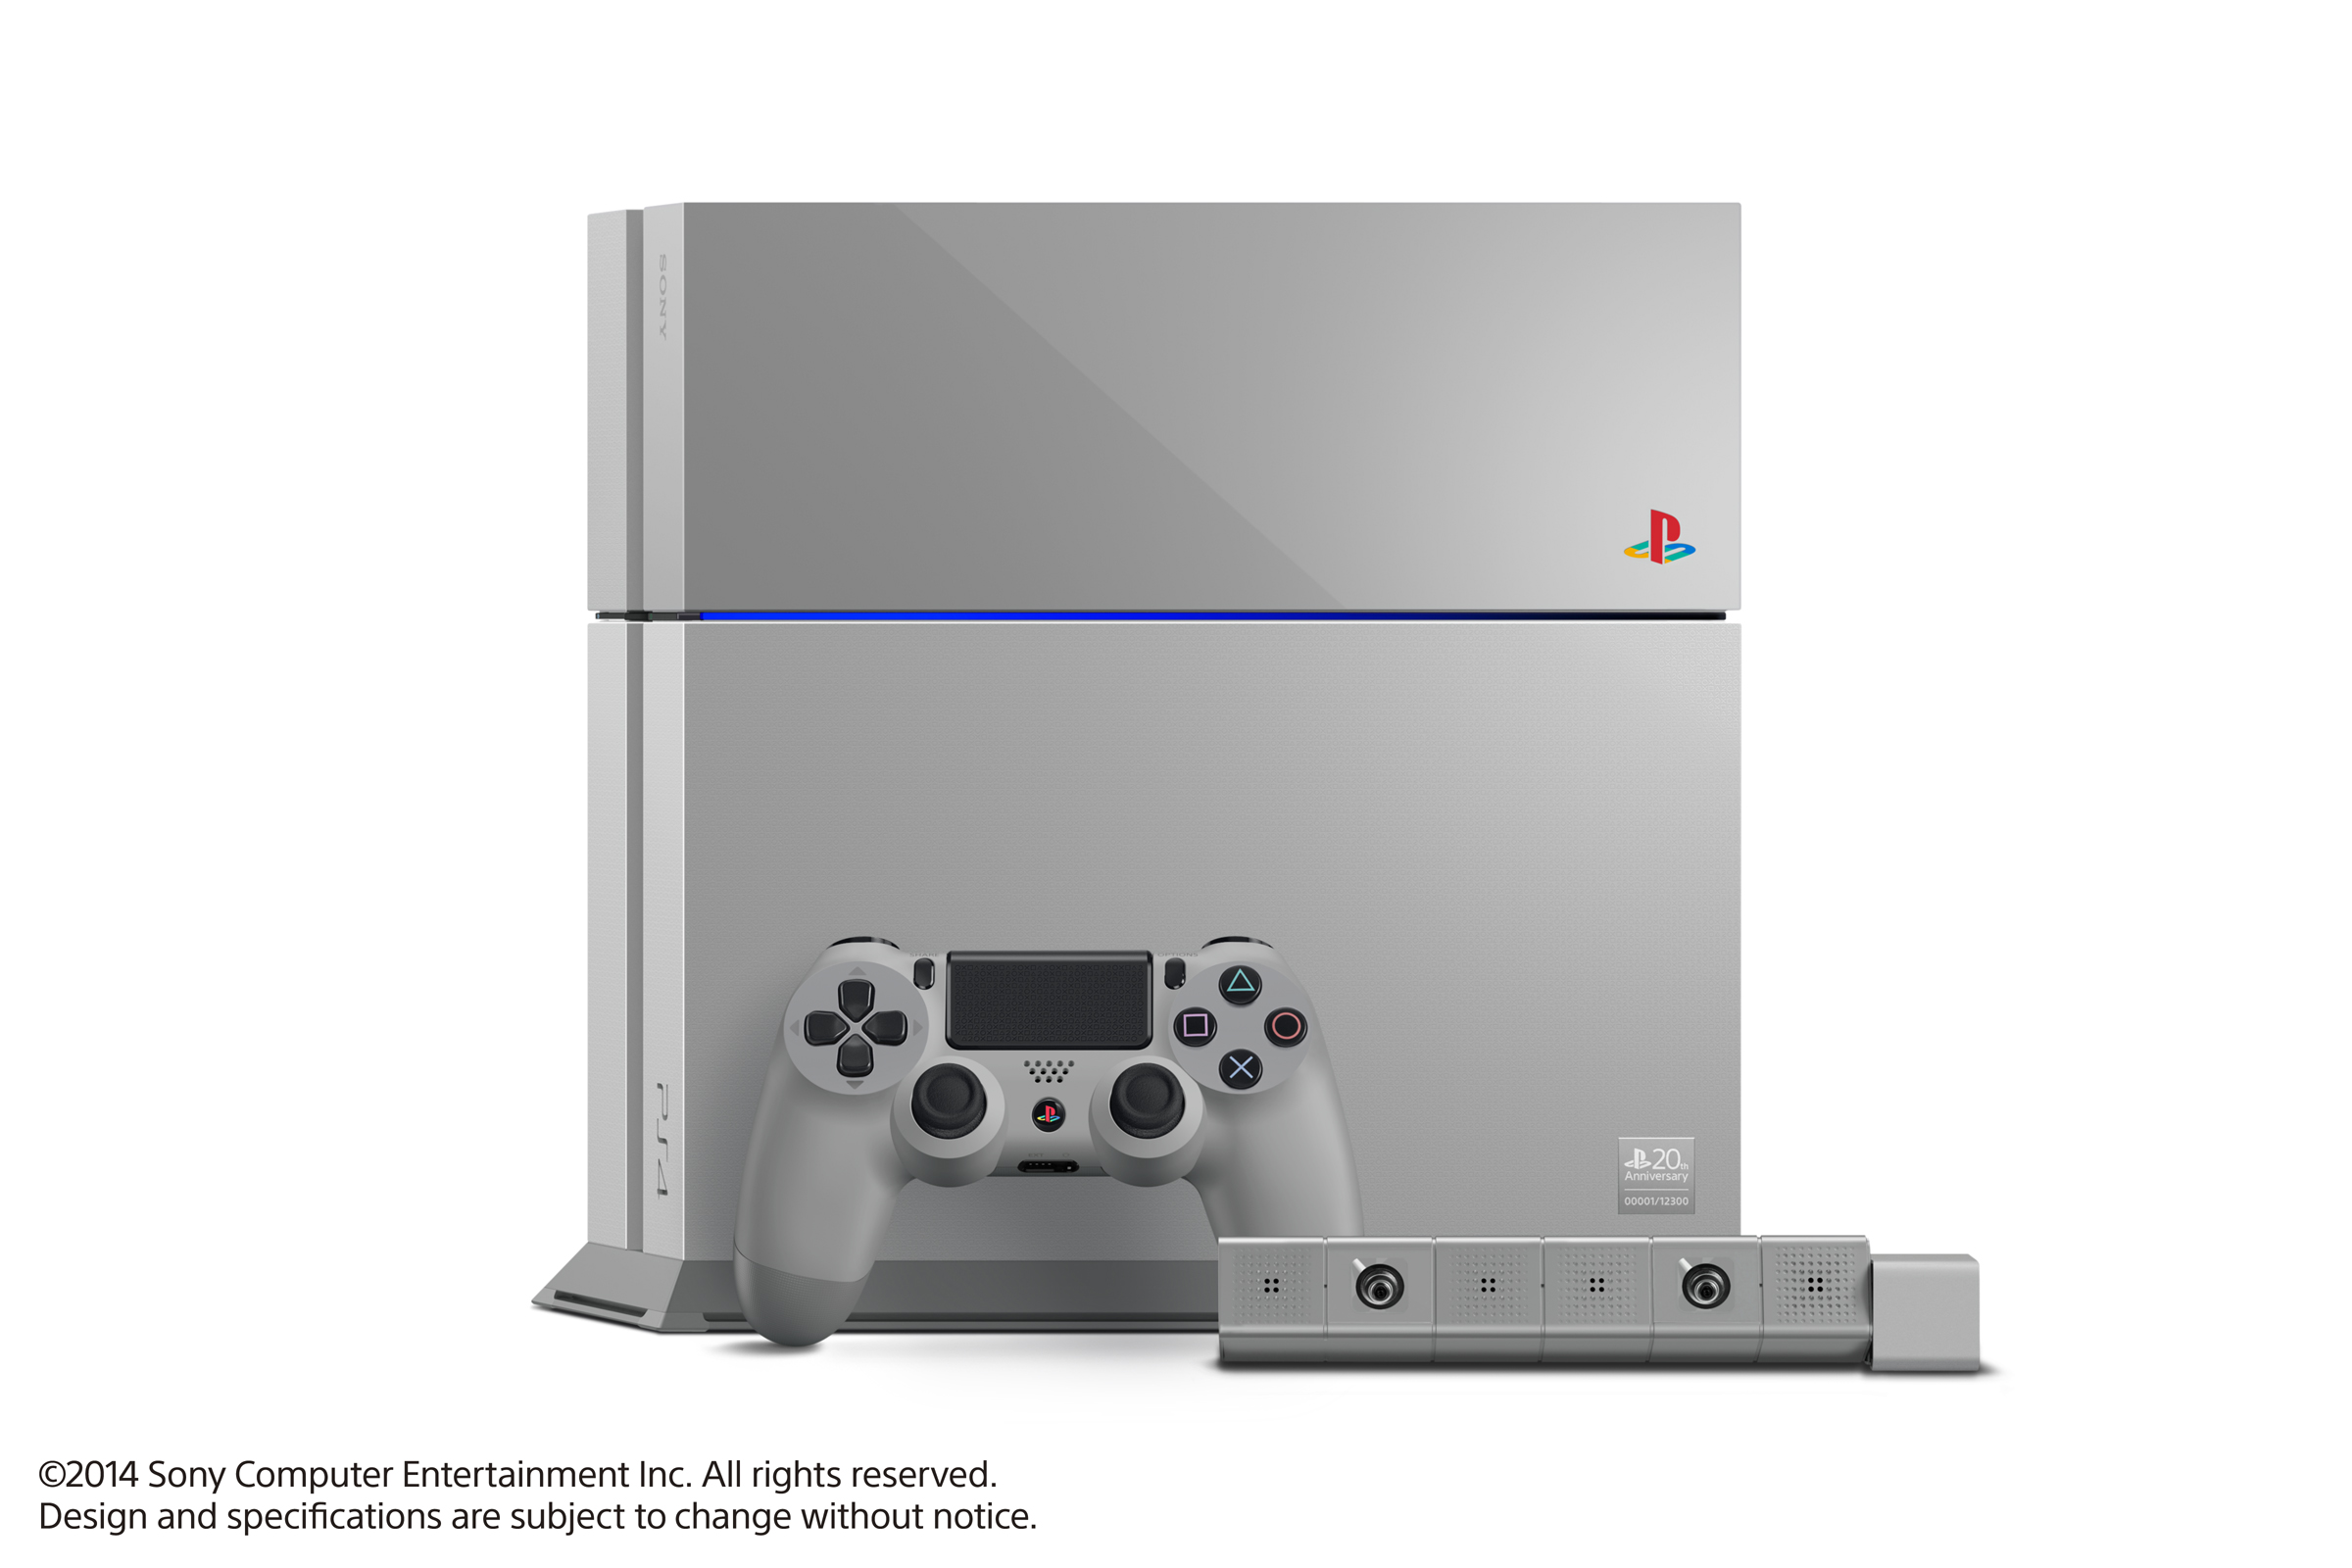 PS4 20th Anniversary System Bundle